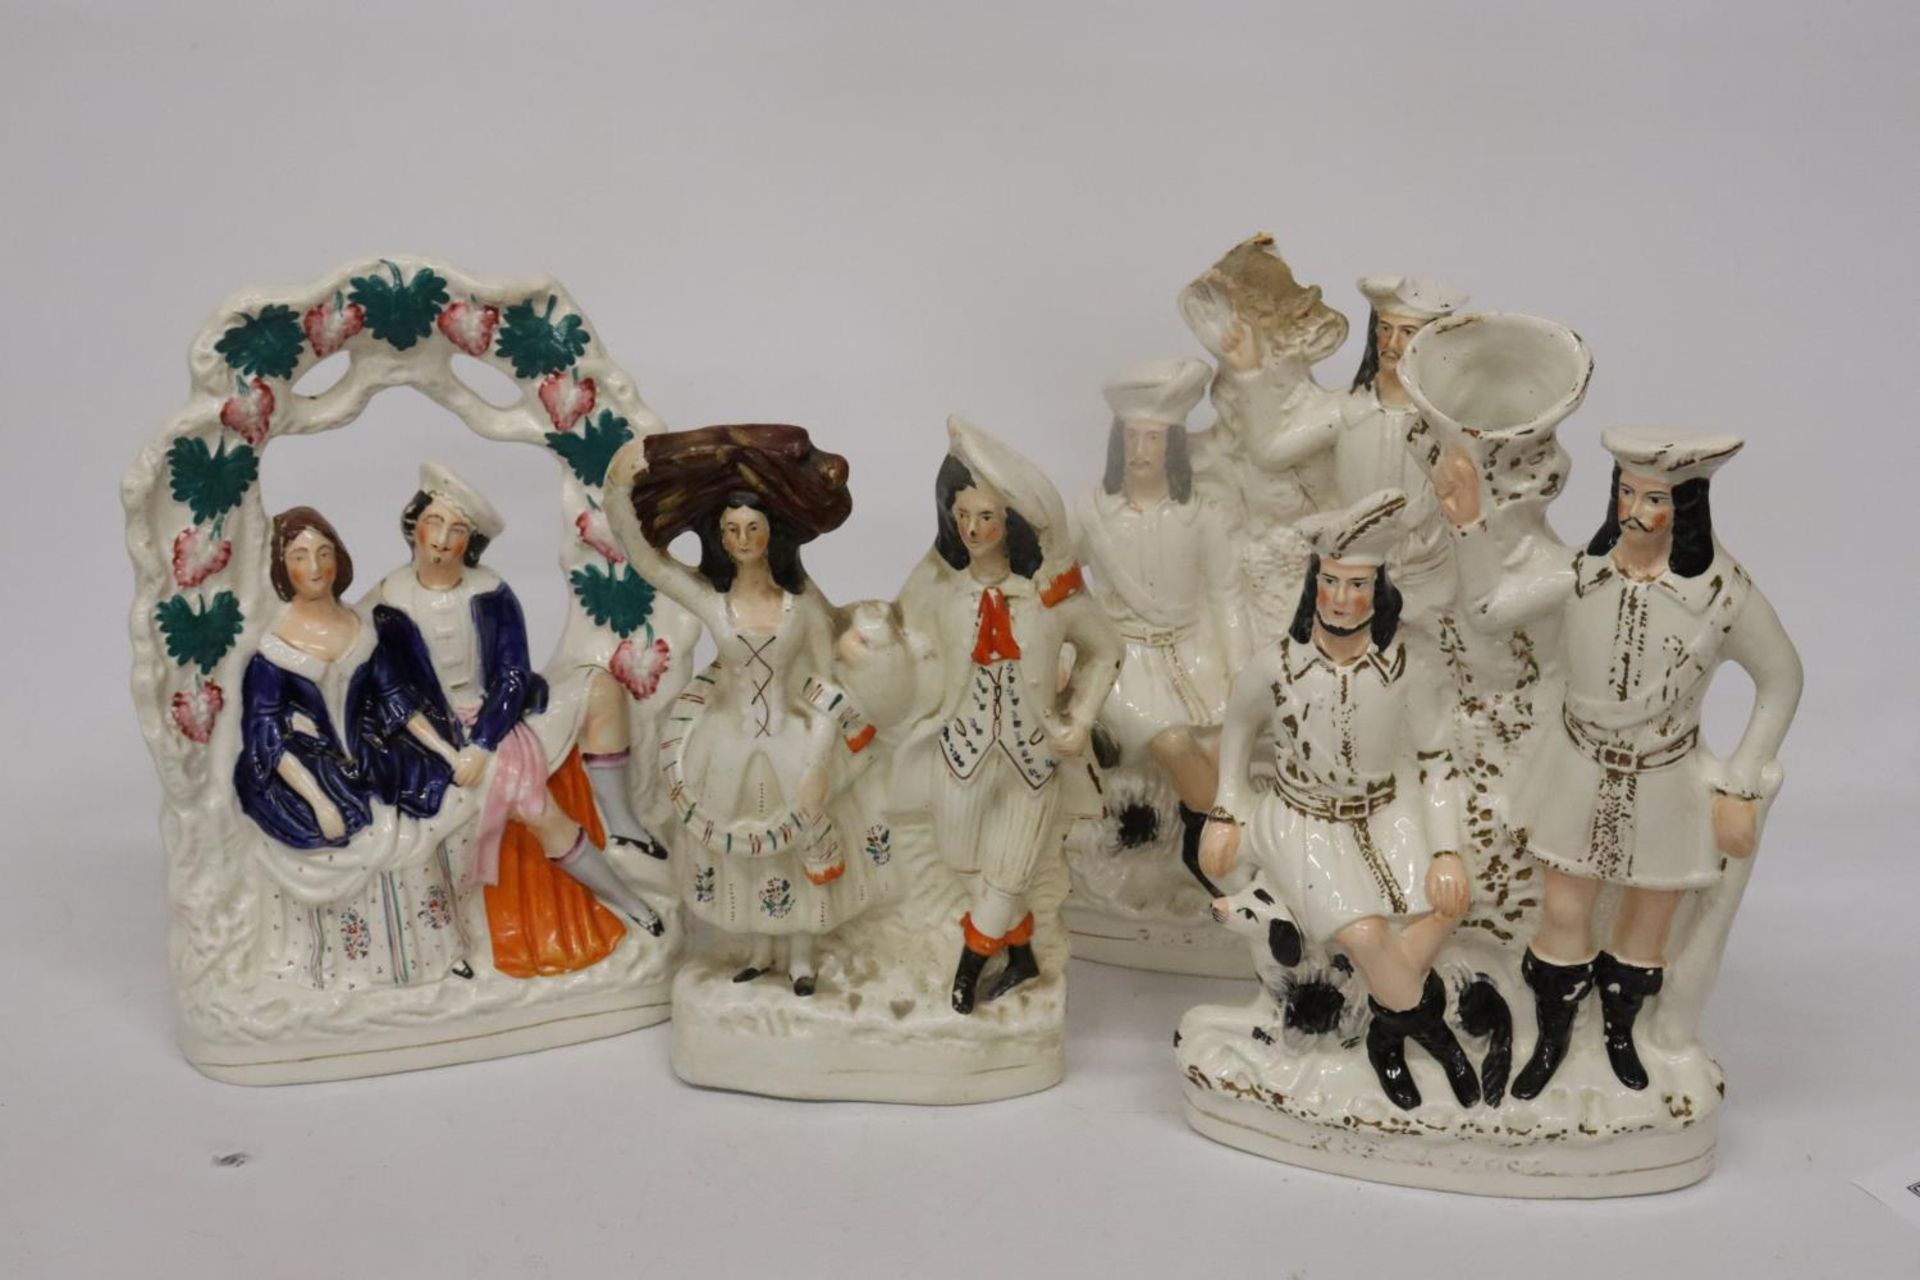 FOUR LARGE STAFFORDSHIRE FLAT BACK FIGURES (A/F)